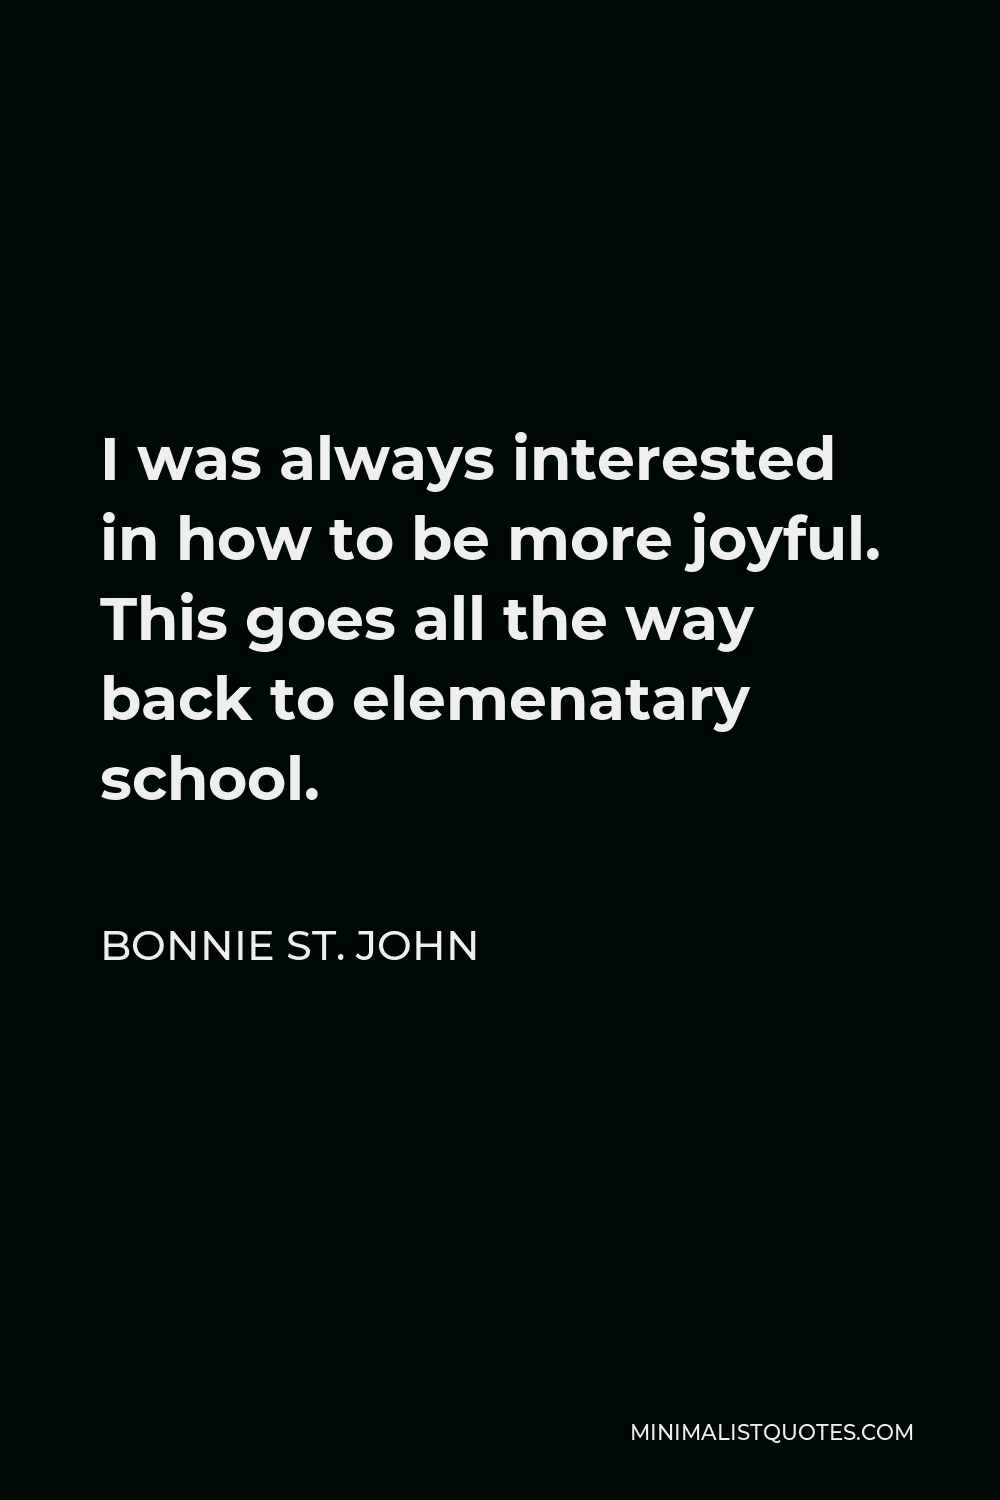 Bonnie St. John Quote - I was always interested in how to be more joyful. This goes all the way back to elemenatary school.